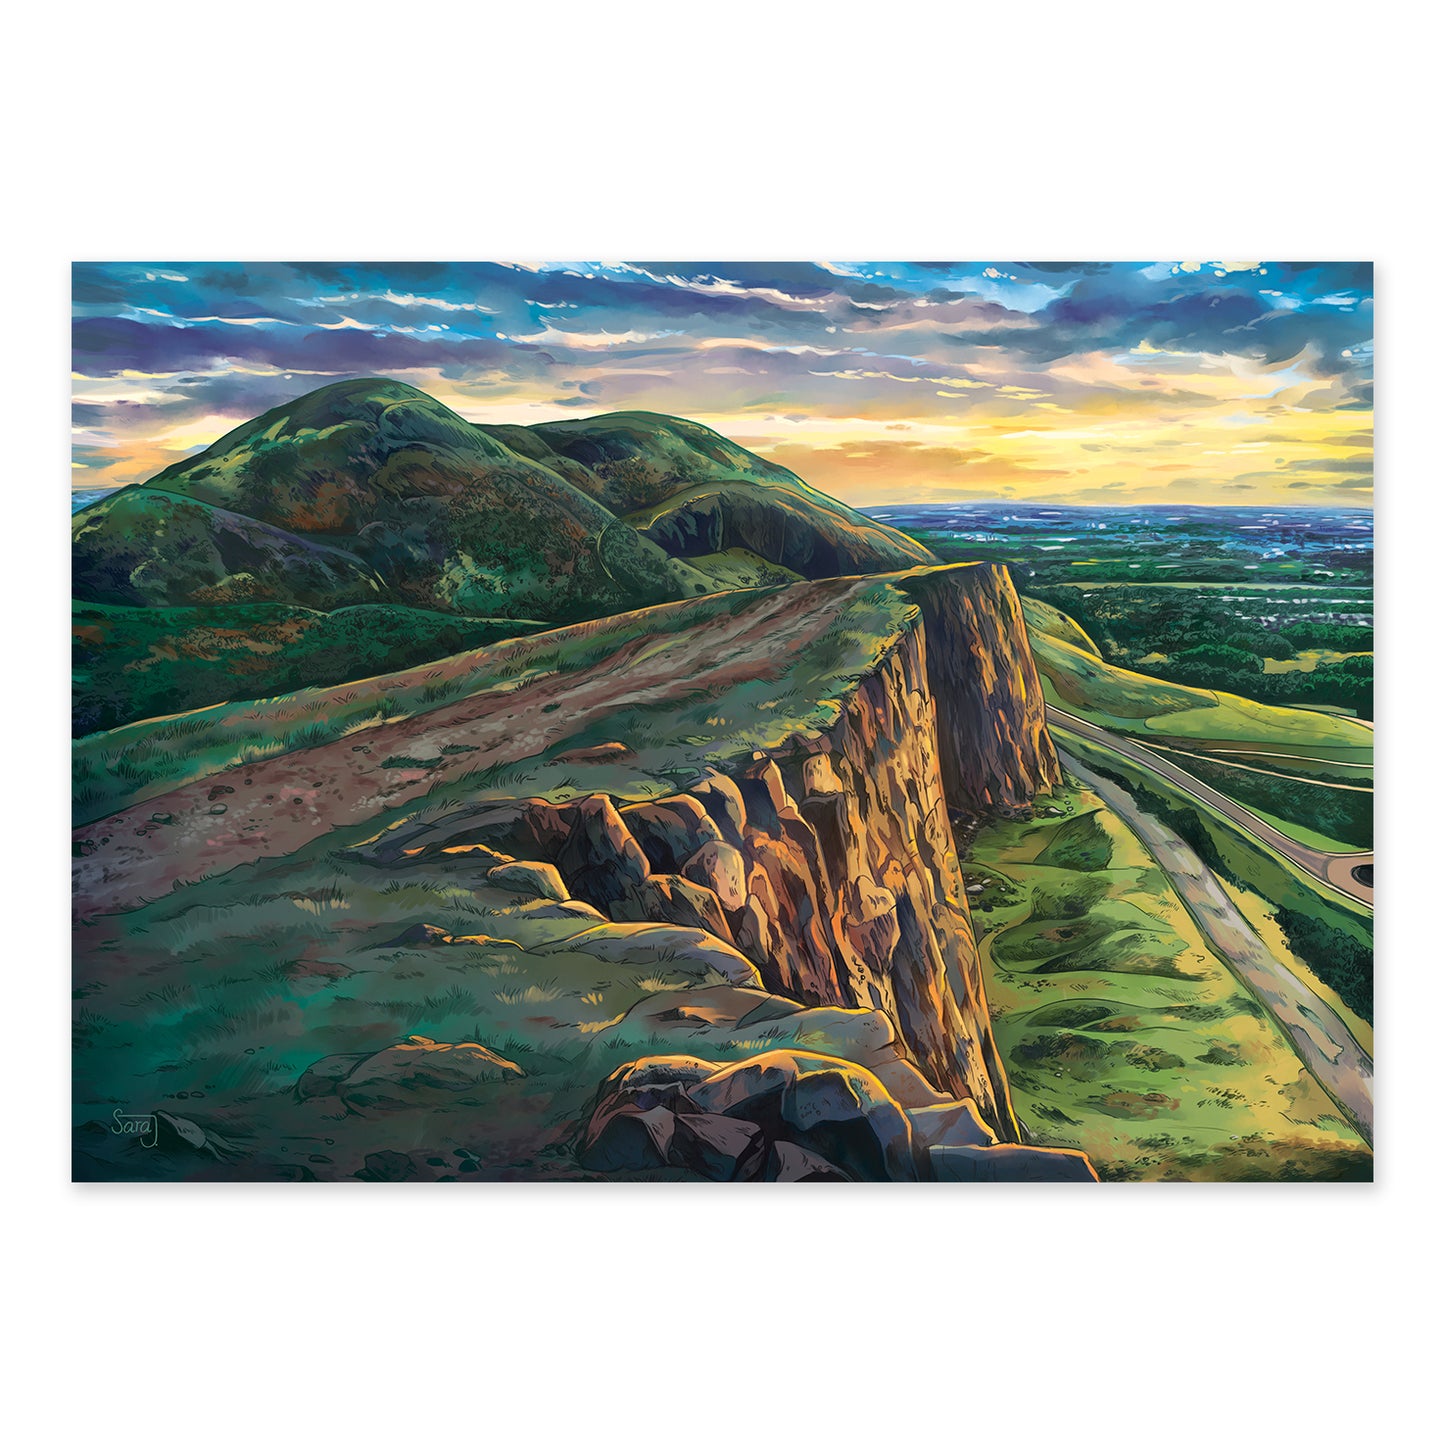 Art Print of Arthur's Seat from Northern point of view.